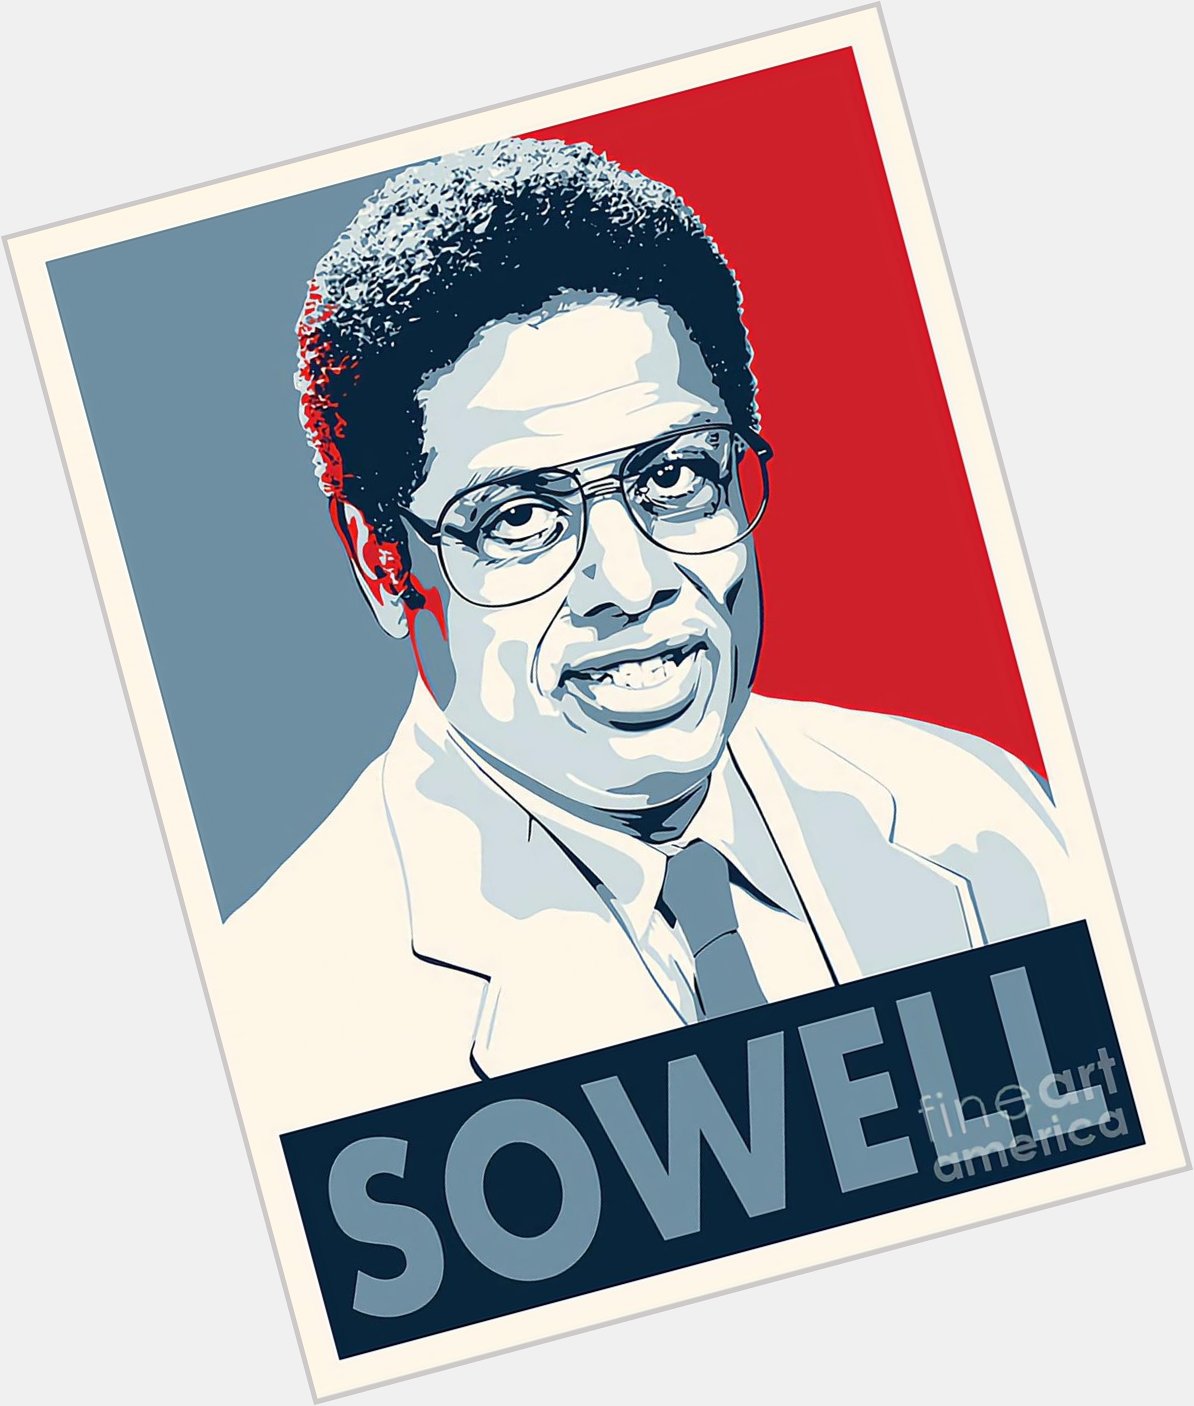 Happy Birthday, to one of the greatest American minds, Dr. Thomas Sowell        